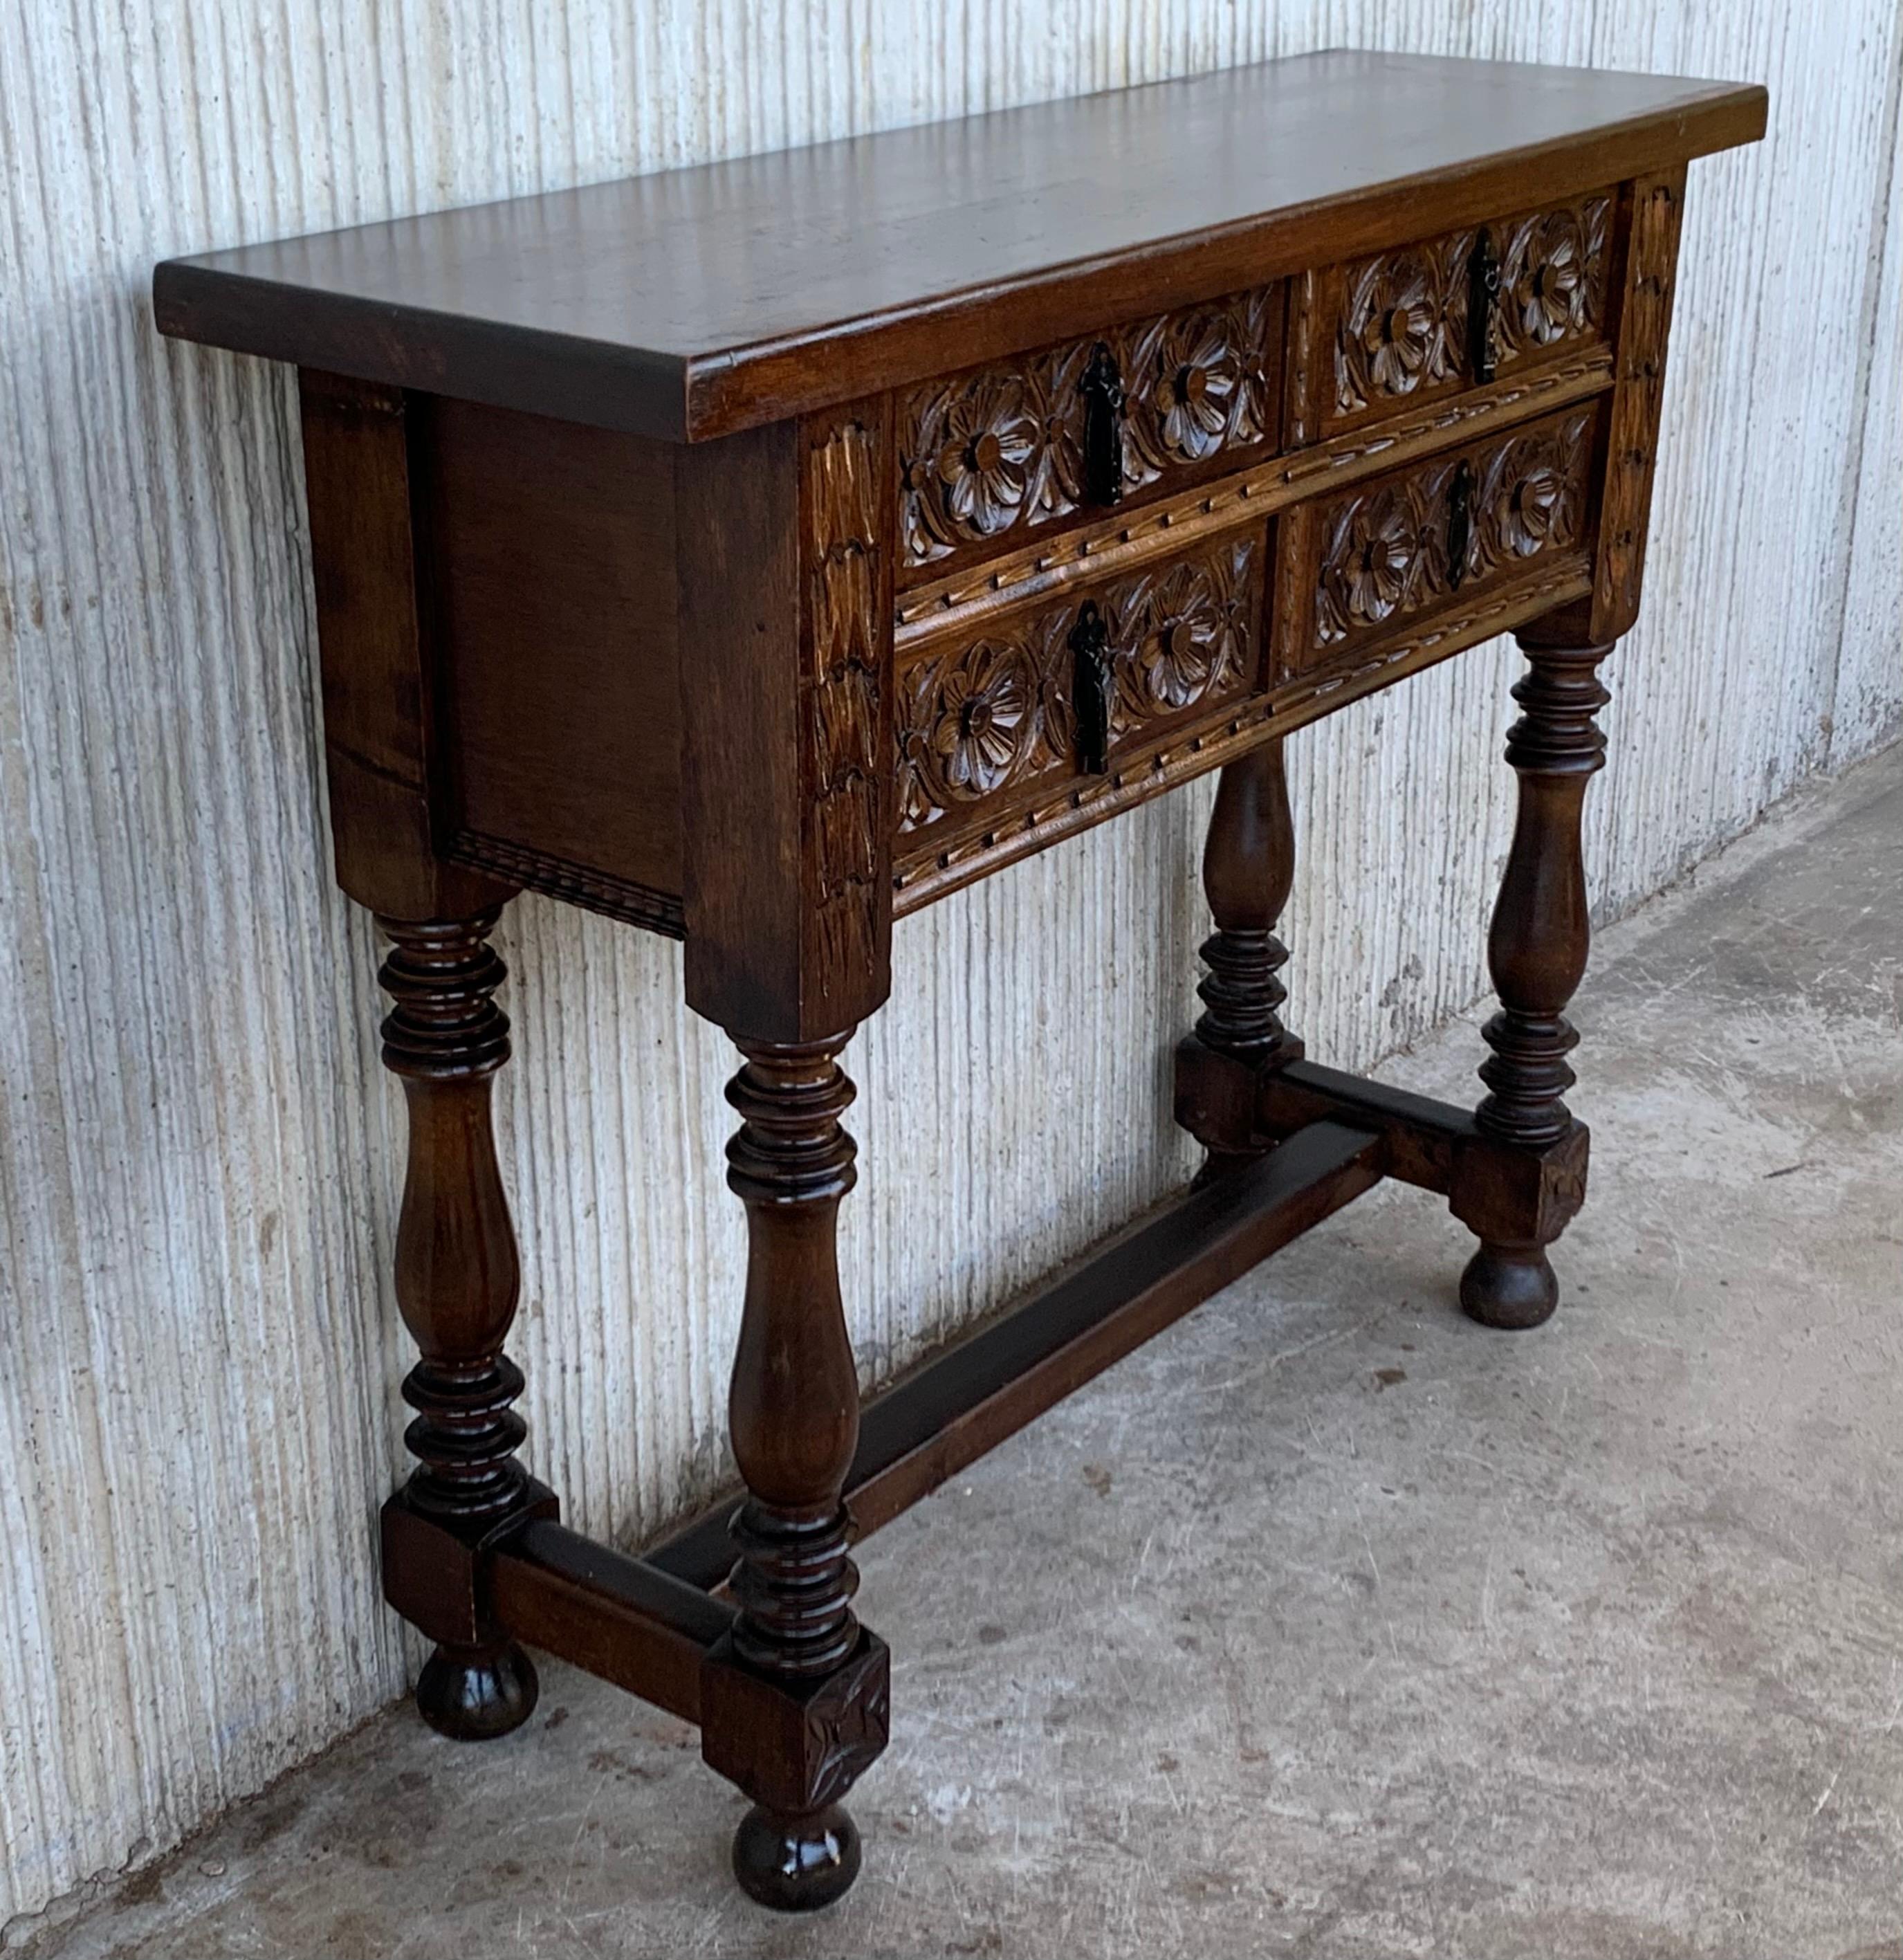 Hand-Carved 19th Century Catalan Spanish Carved Walnut Console Sofa Table, Four Drawers